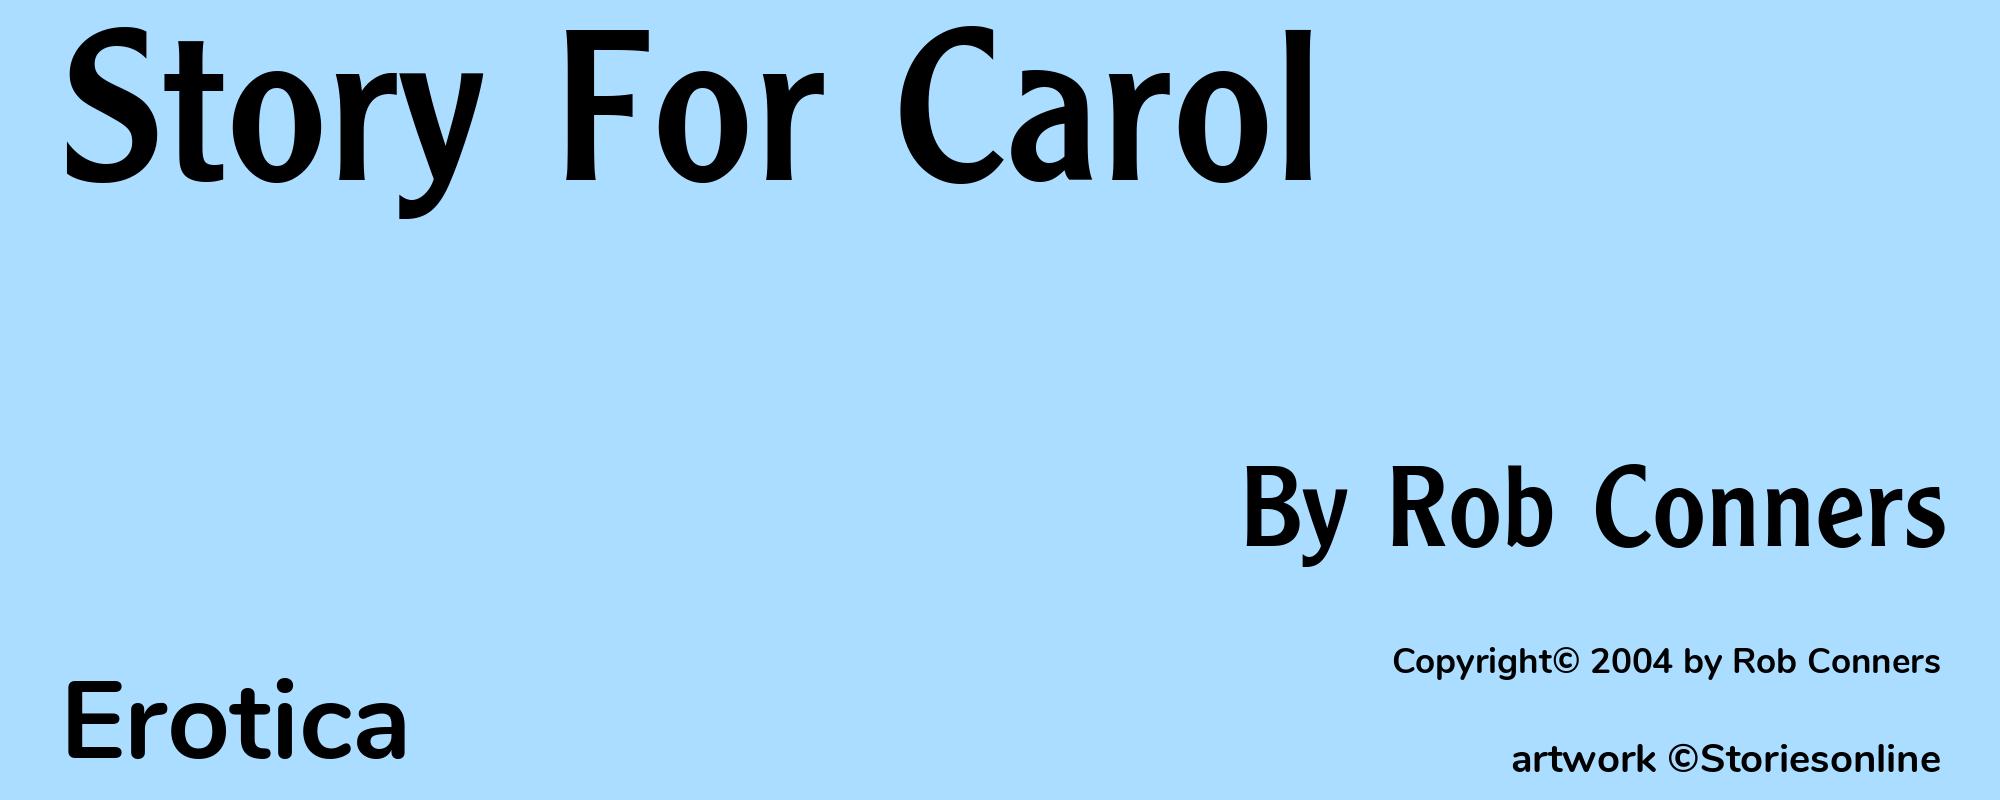 Story For Carol - Cover